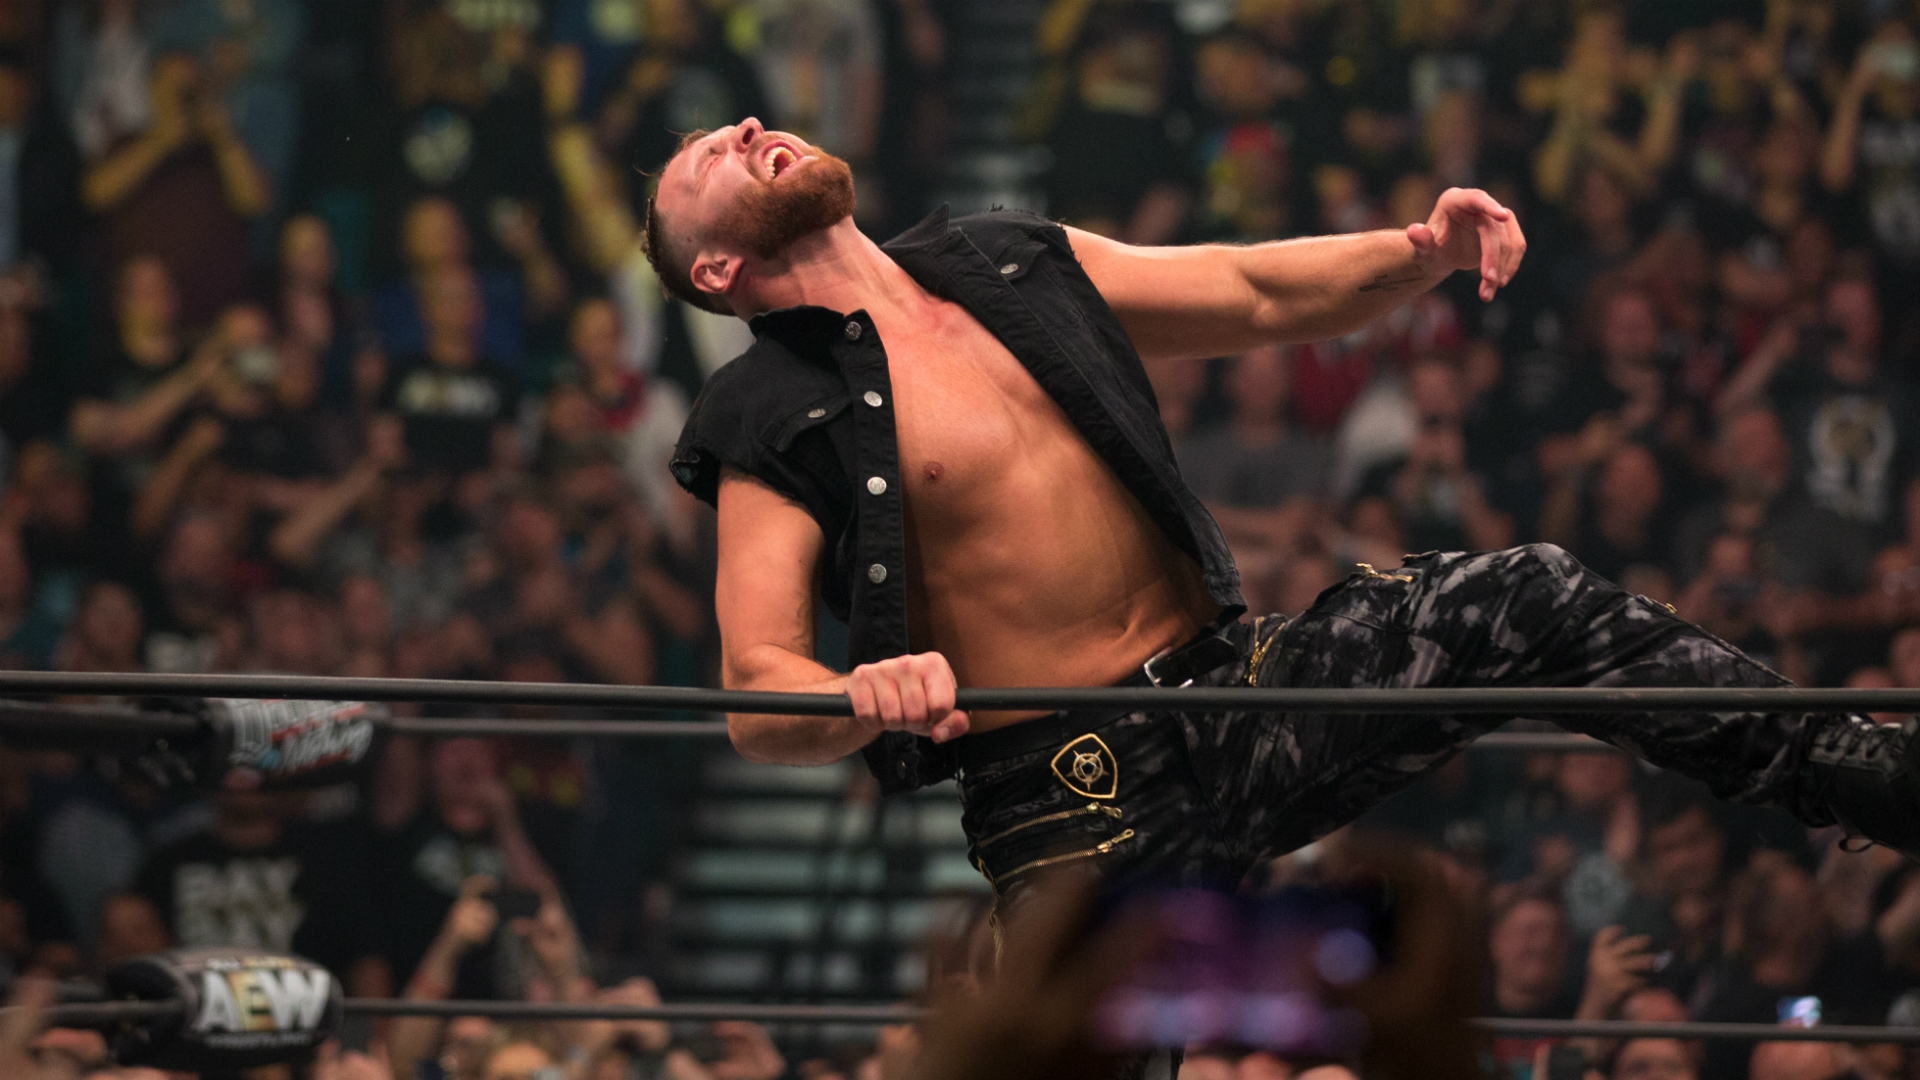 Jon Moxley signs new deal with AEW, reports confirm